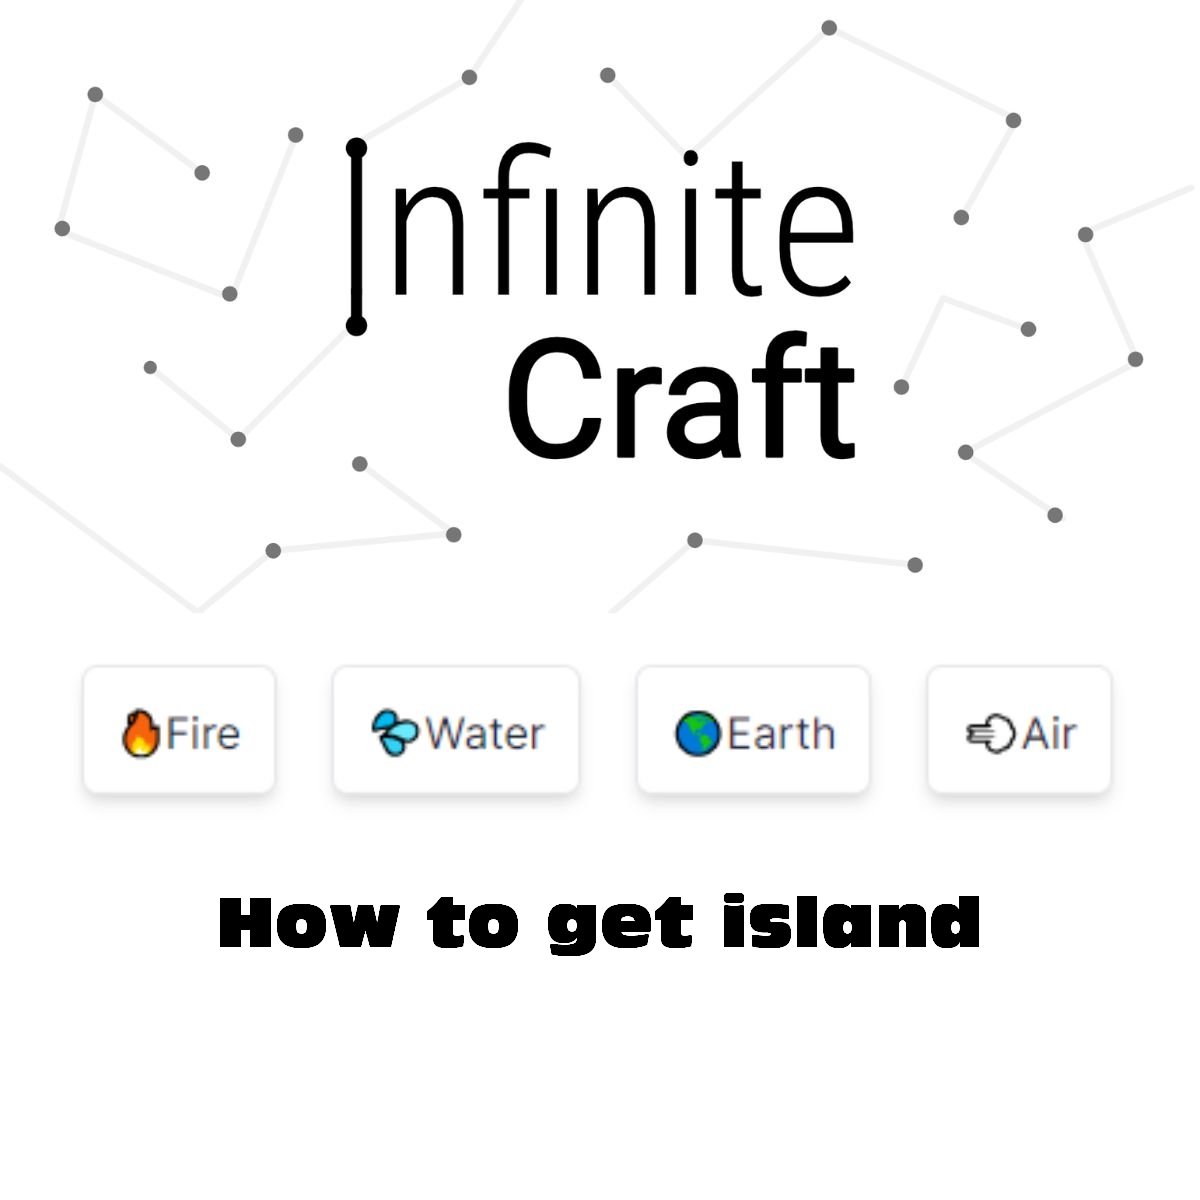 how to get island in infinite craft